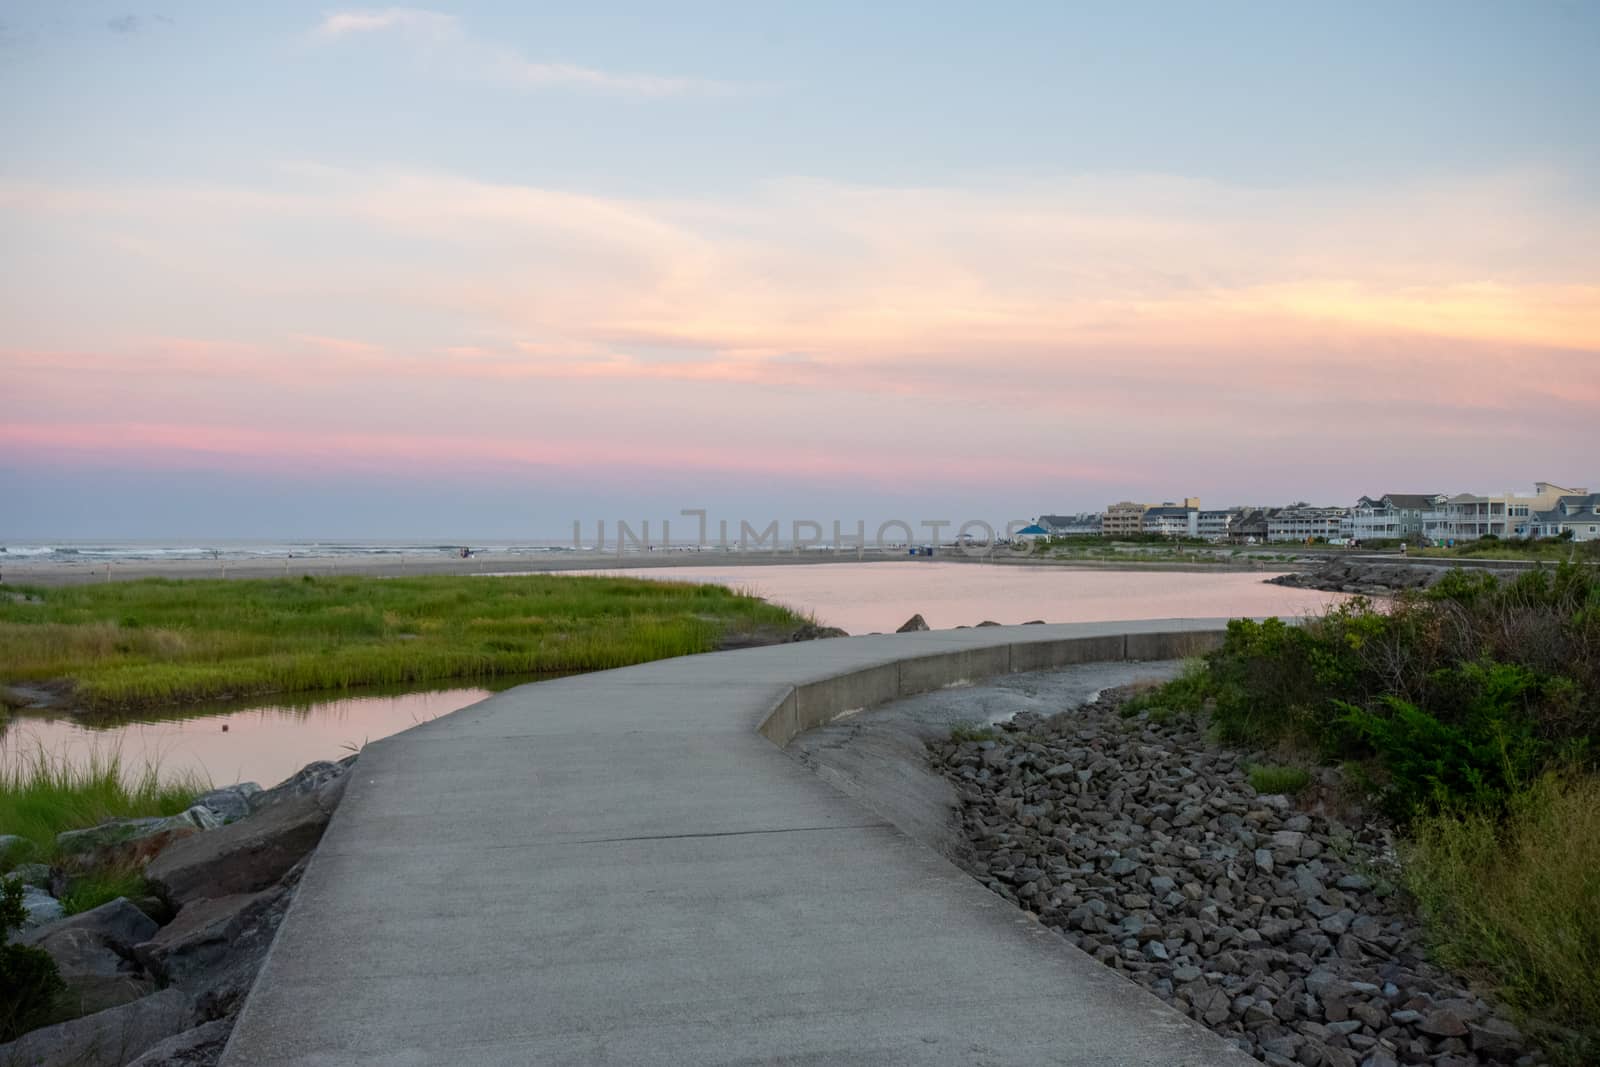 A Concrete Path With an Orange and Blue Sunset Sky Behind It at the North Wildwood Sea Wall in Wildwood New Jersey